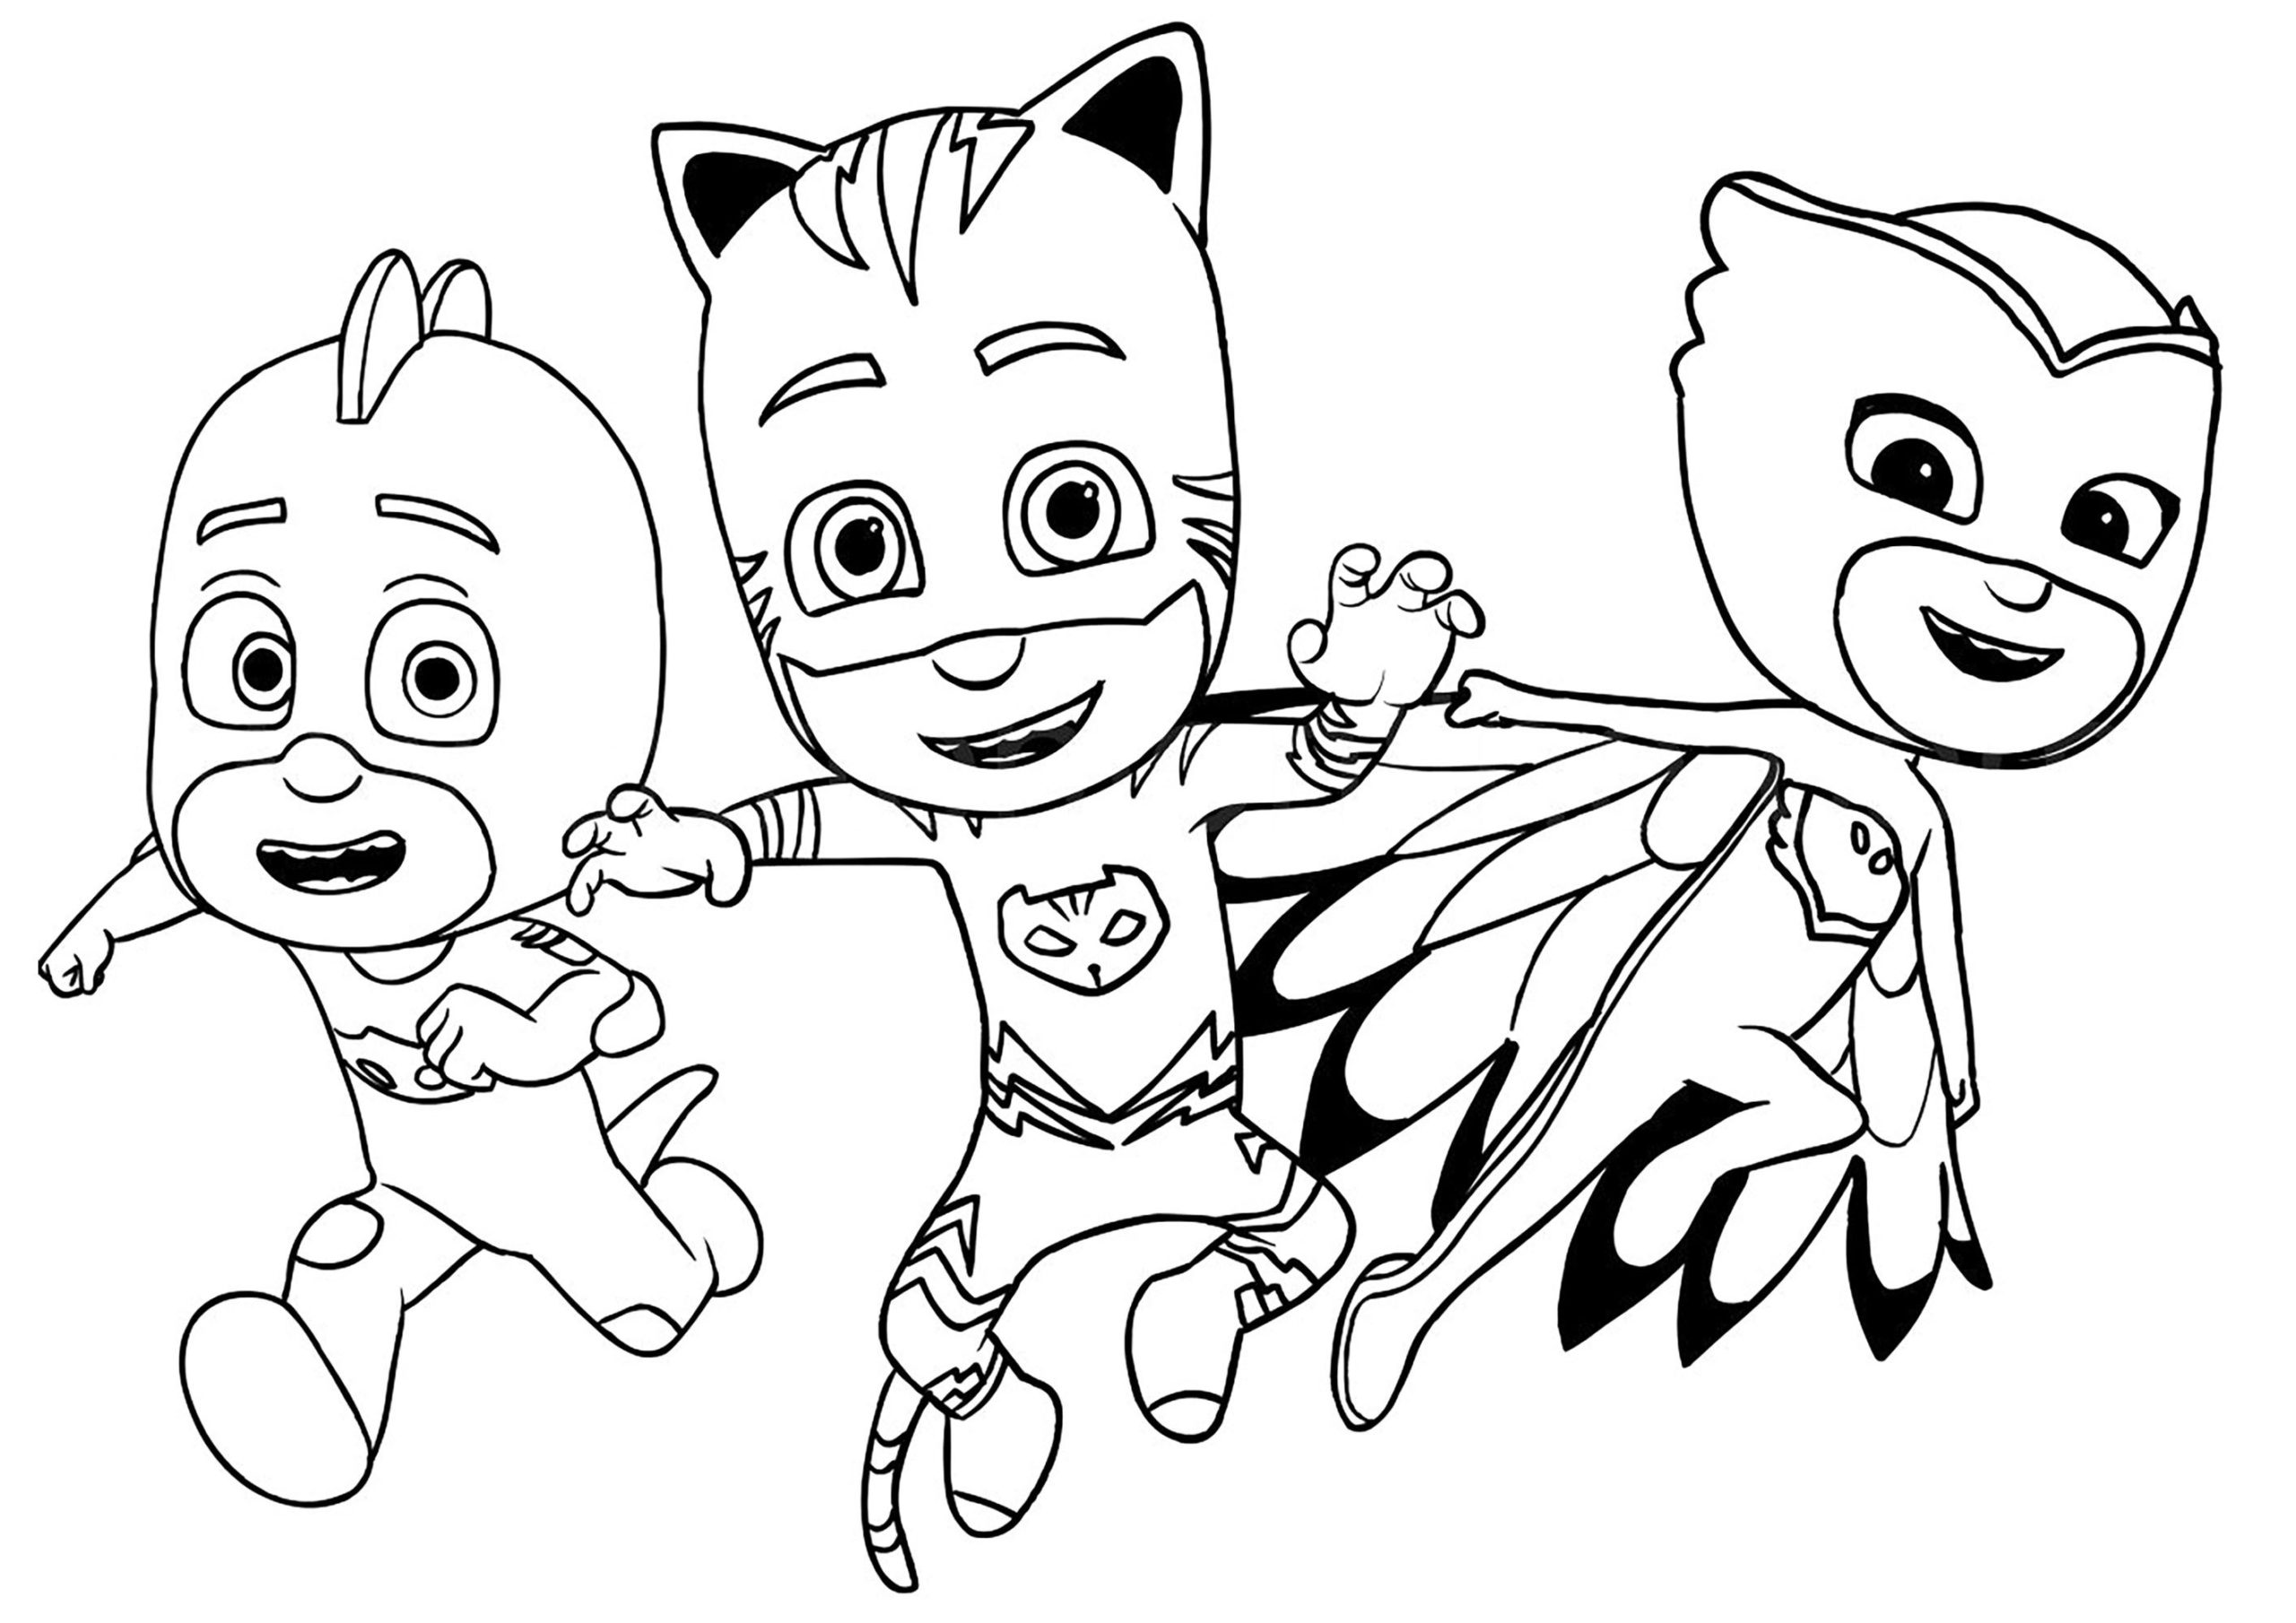 Coloring Pages : Coloring Book Printable Pjasks Free Cat Boy For ...